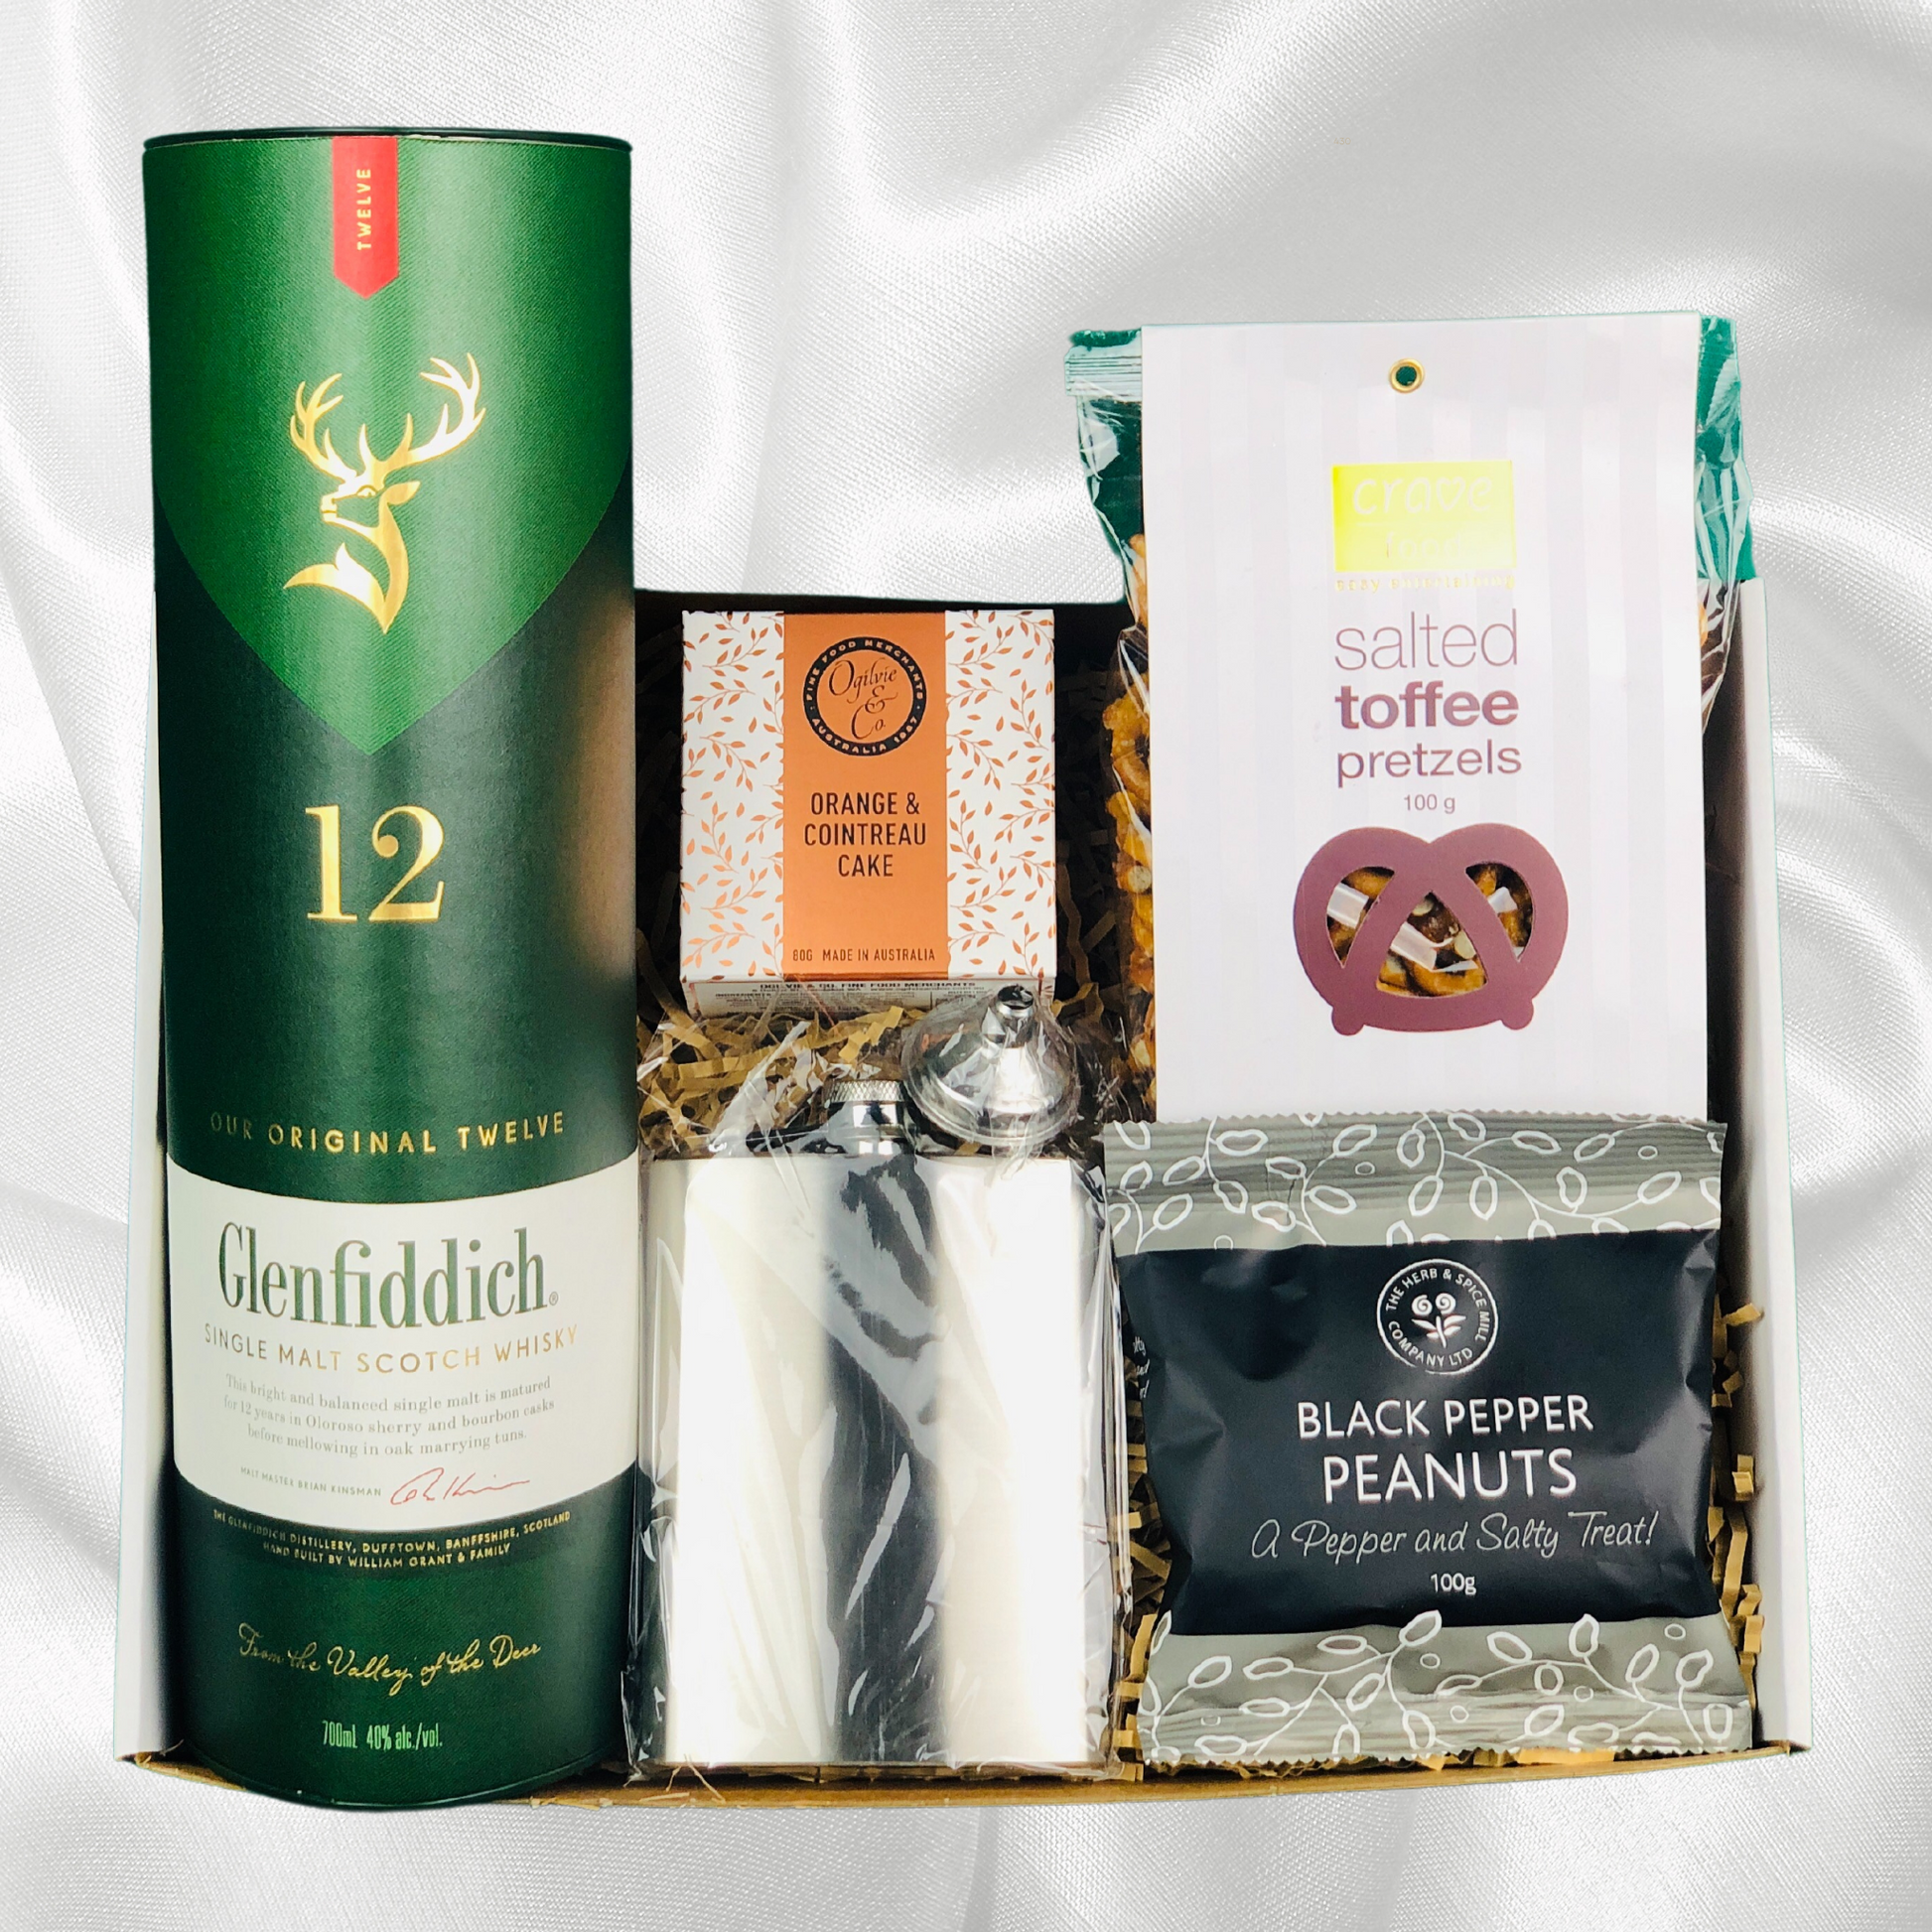 Gift Hampers Australia|Food Hampers|Food Baskets|Whisky Hampers|Settlement Gifts|Corporate Gift Hampers|Scotch Whisky Hamper|Gift for Him|Perfect Gift for Husband|Gift for Dad|Gift Hampers in Perth